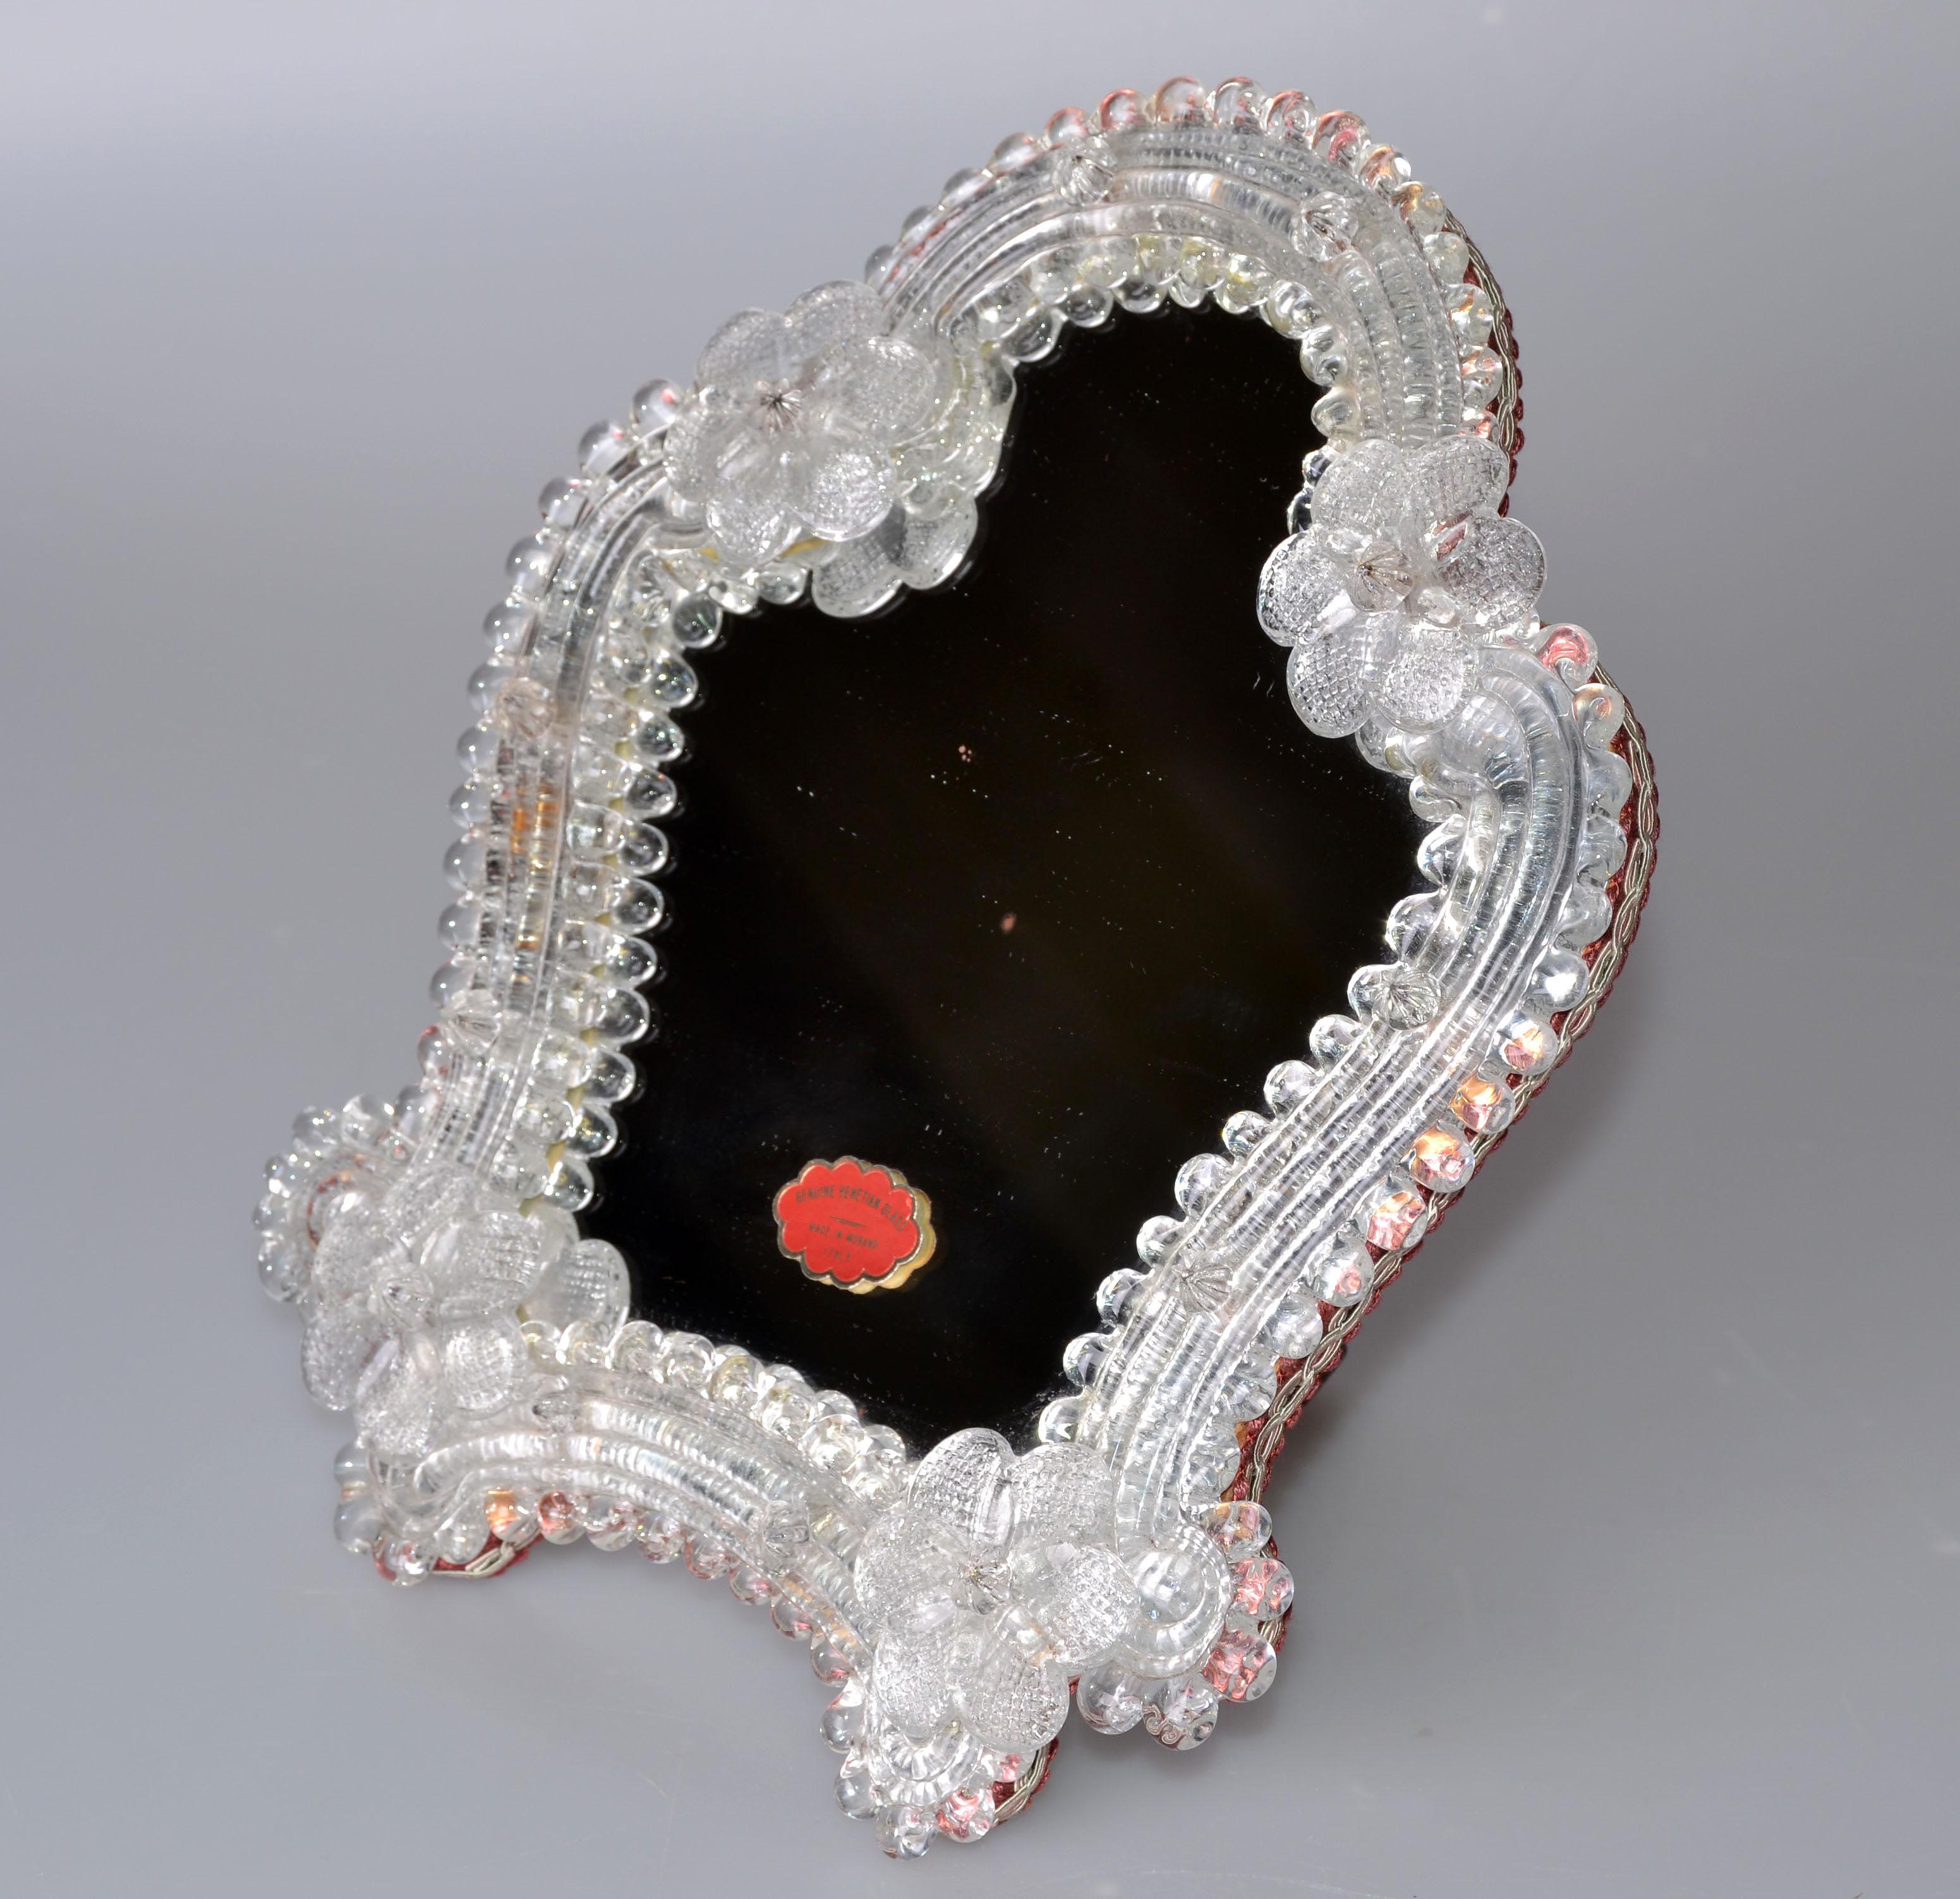 Lovely desktop Murano glass vanity mirror from Italy. 
Decorated with handmade Bohemian flowers and supported with a wooden back.
Original label on the mirror. 
Mirror size: 6 inches x 7 inches.